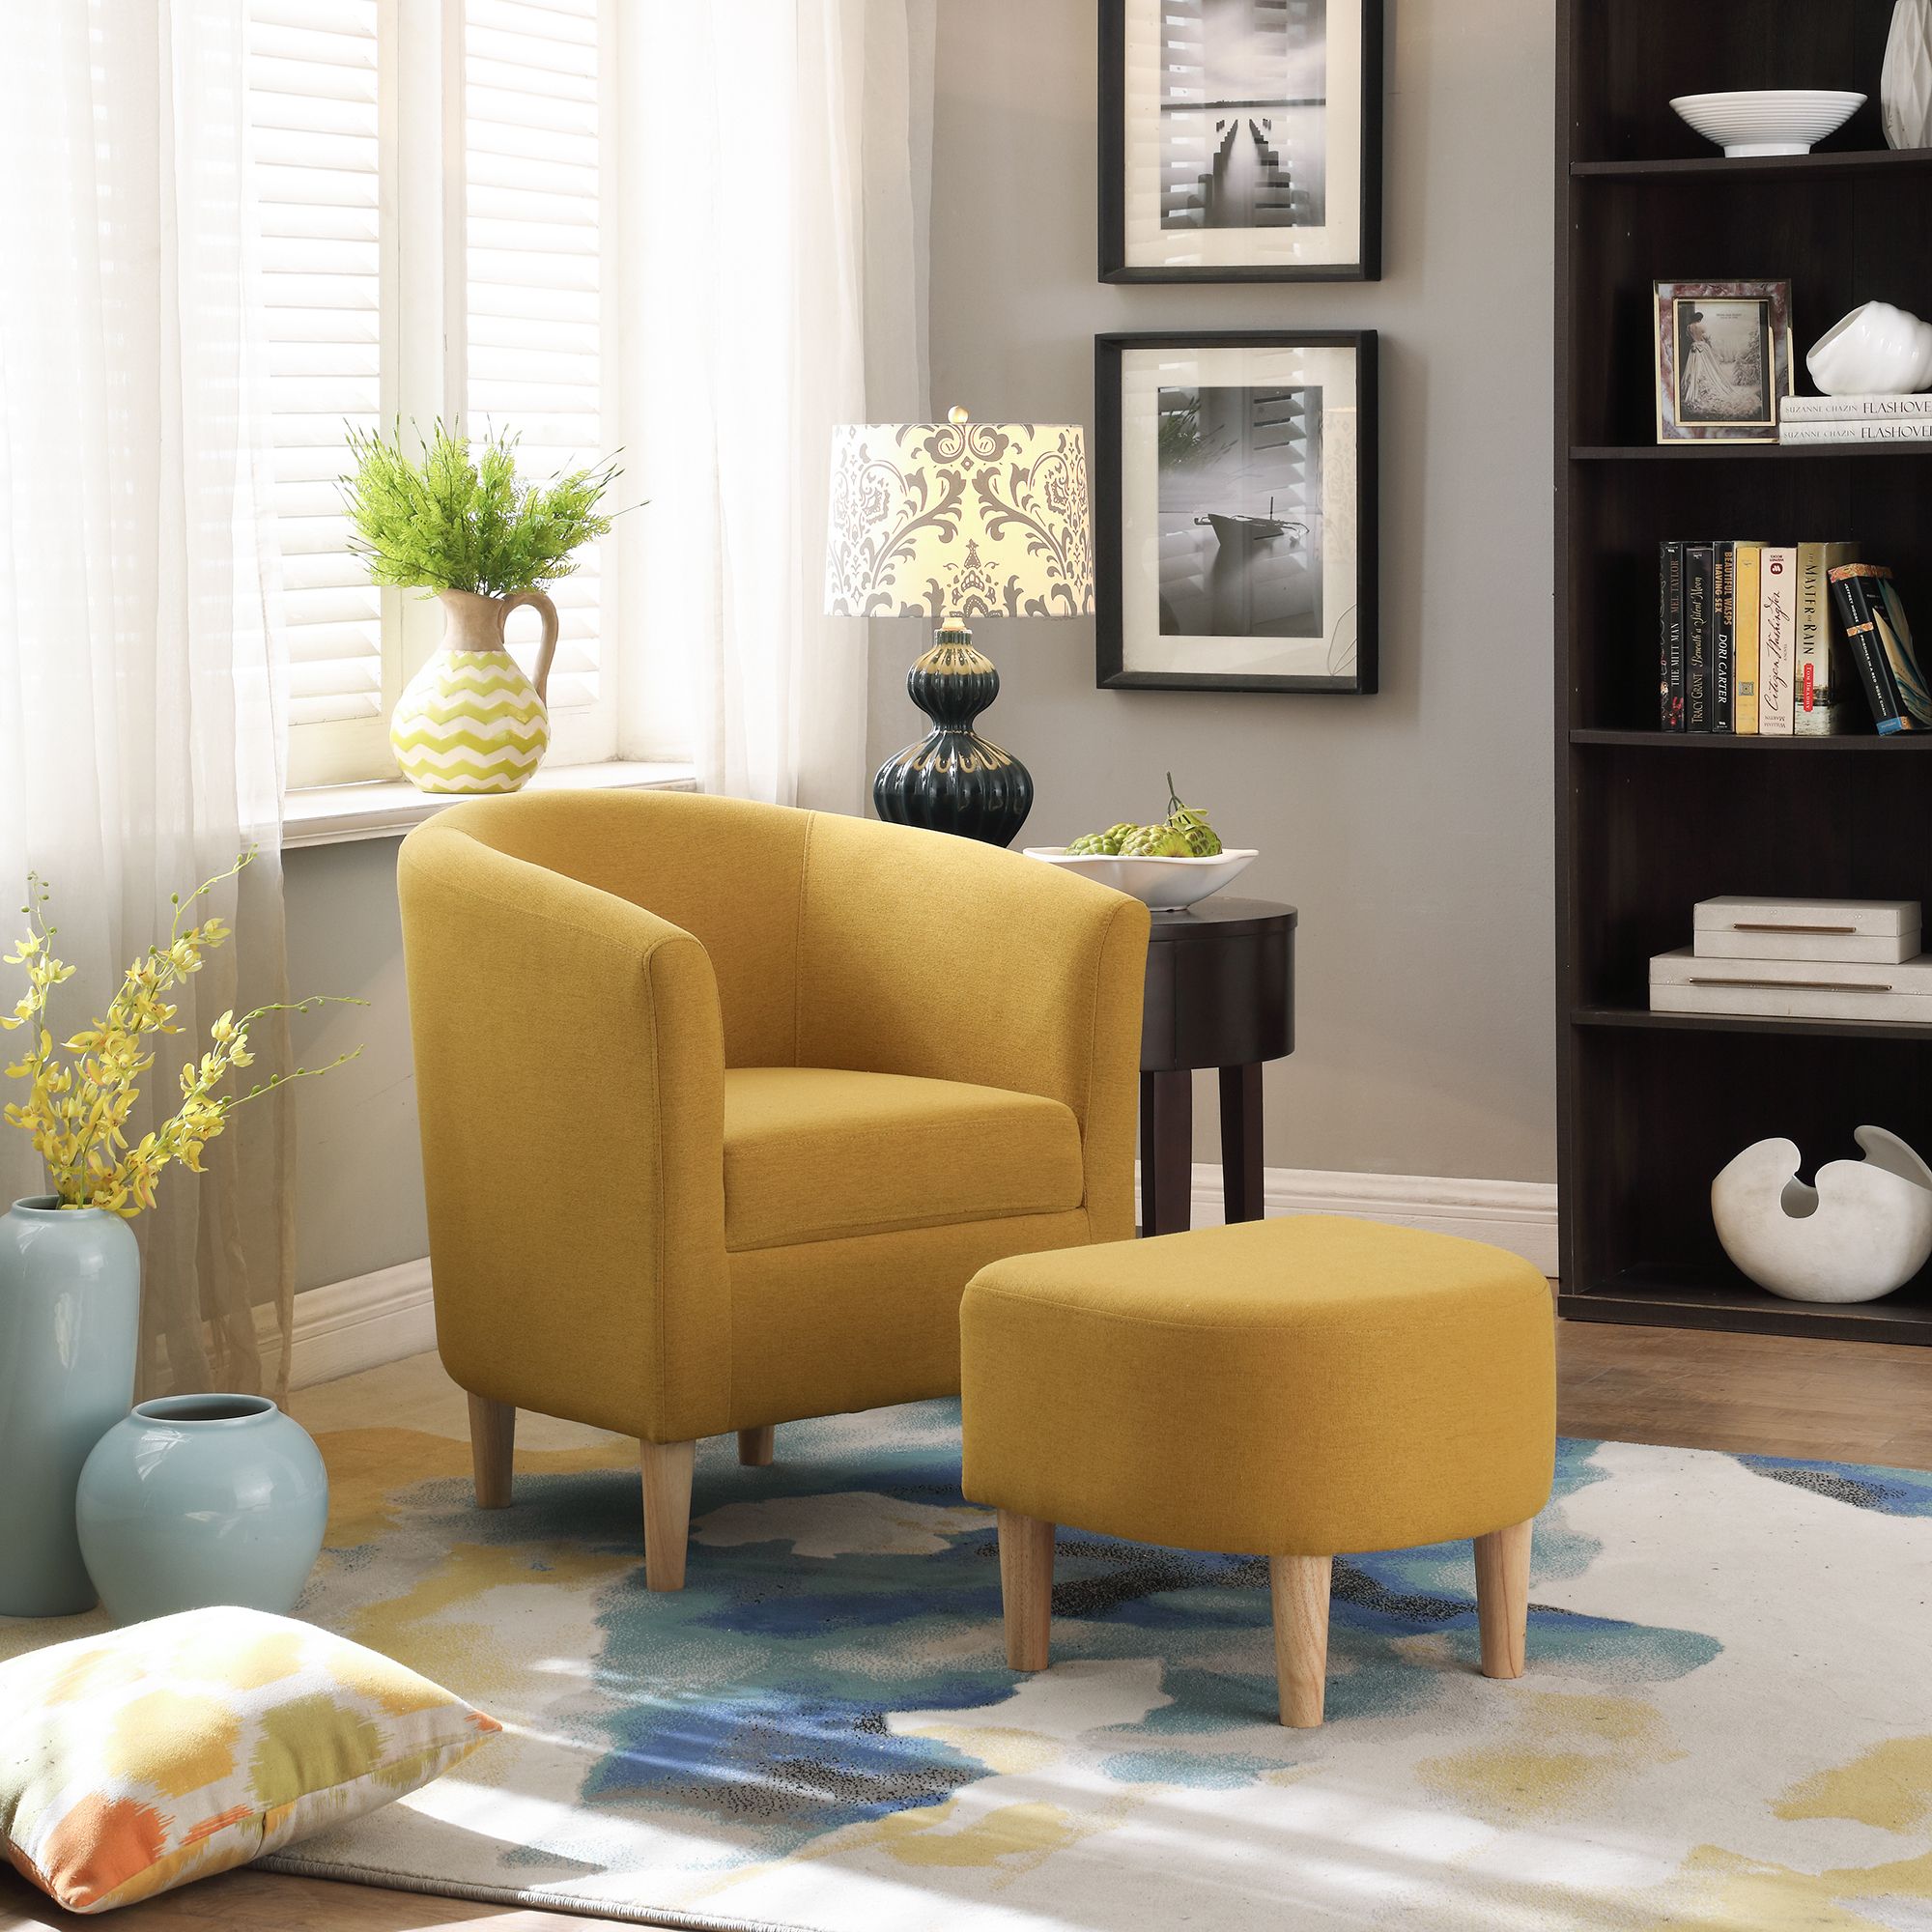 Modern Accent Arm Chair Upholstered Chair Fabric Single Sofa + Ottoman Within Blue Fabric Lounge Chair And Ottomans Set (View 8 of 20)